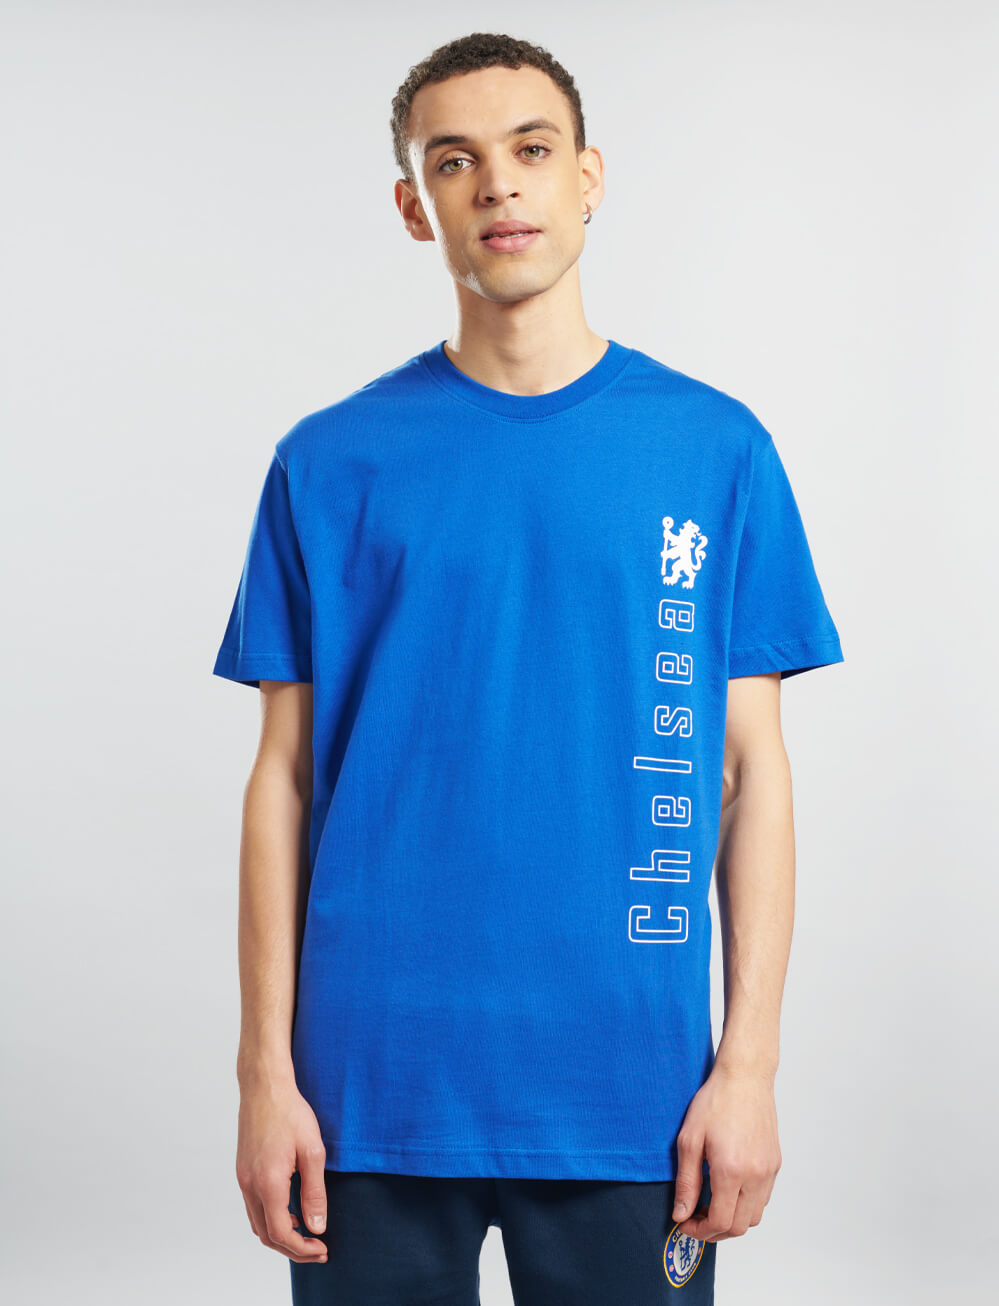 Official Chelsea Graphic T-Shirt - Royal Blue - The World Football Store